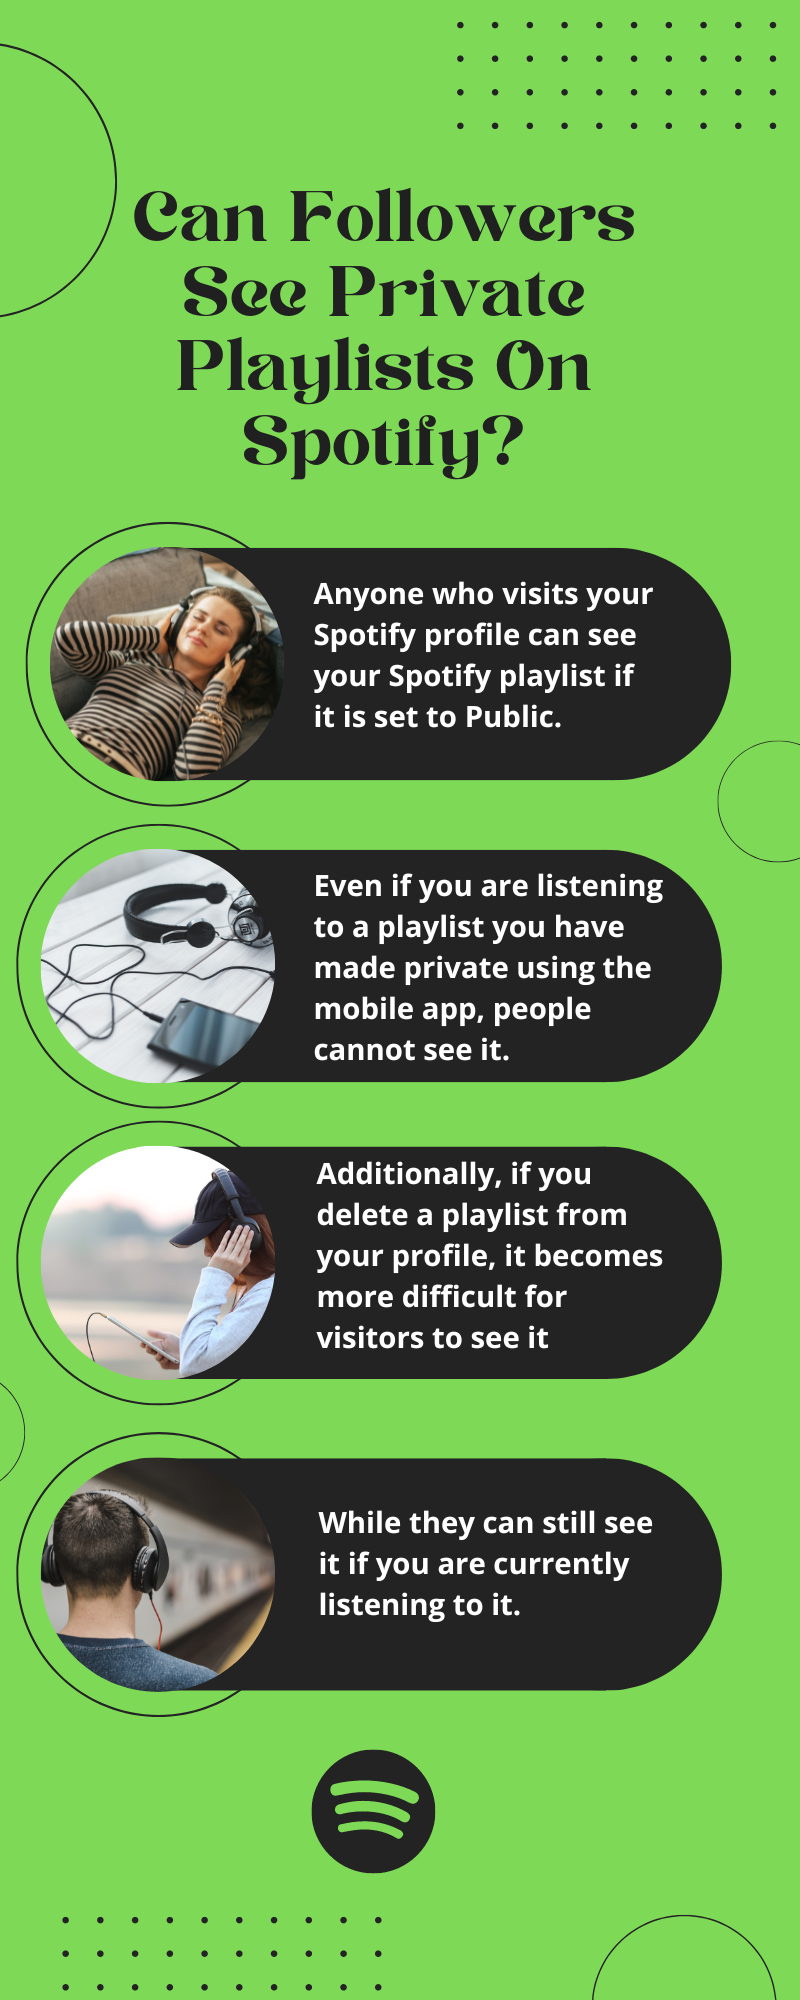 Can Followers See Private Playlists On Spotify?